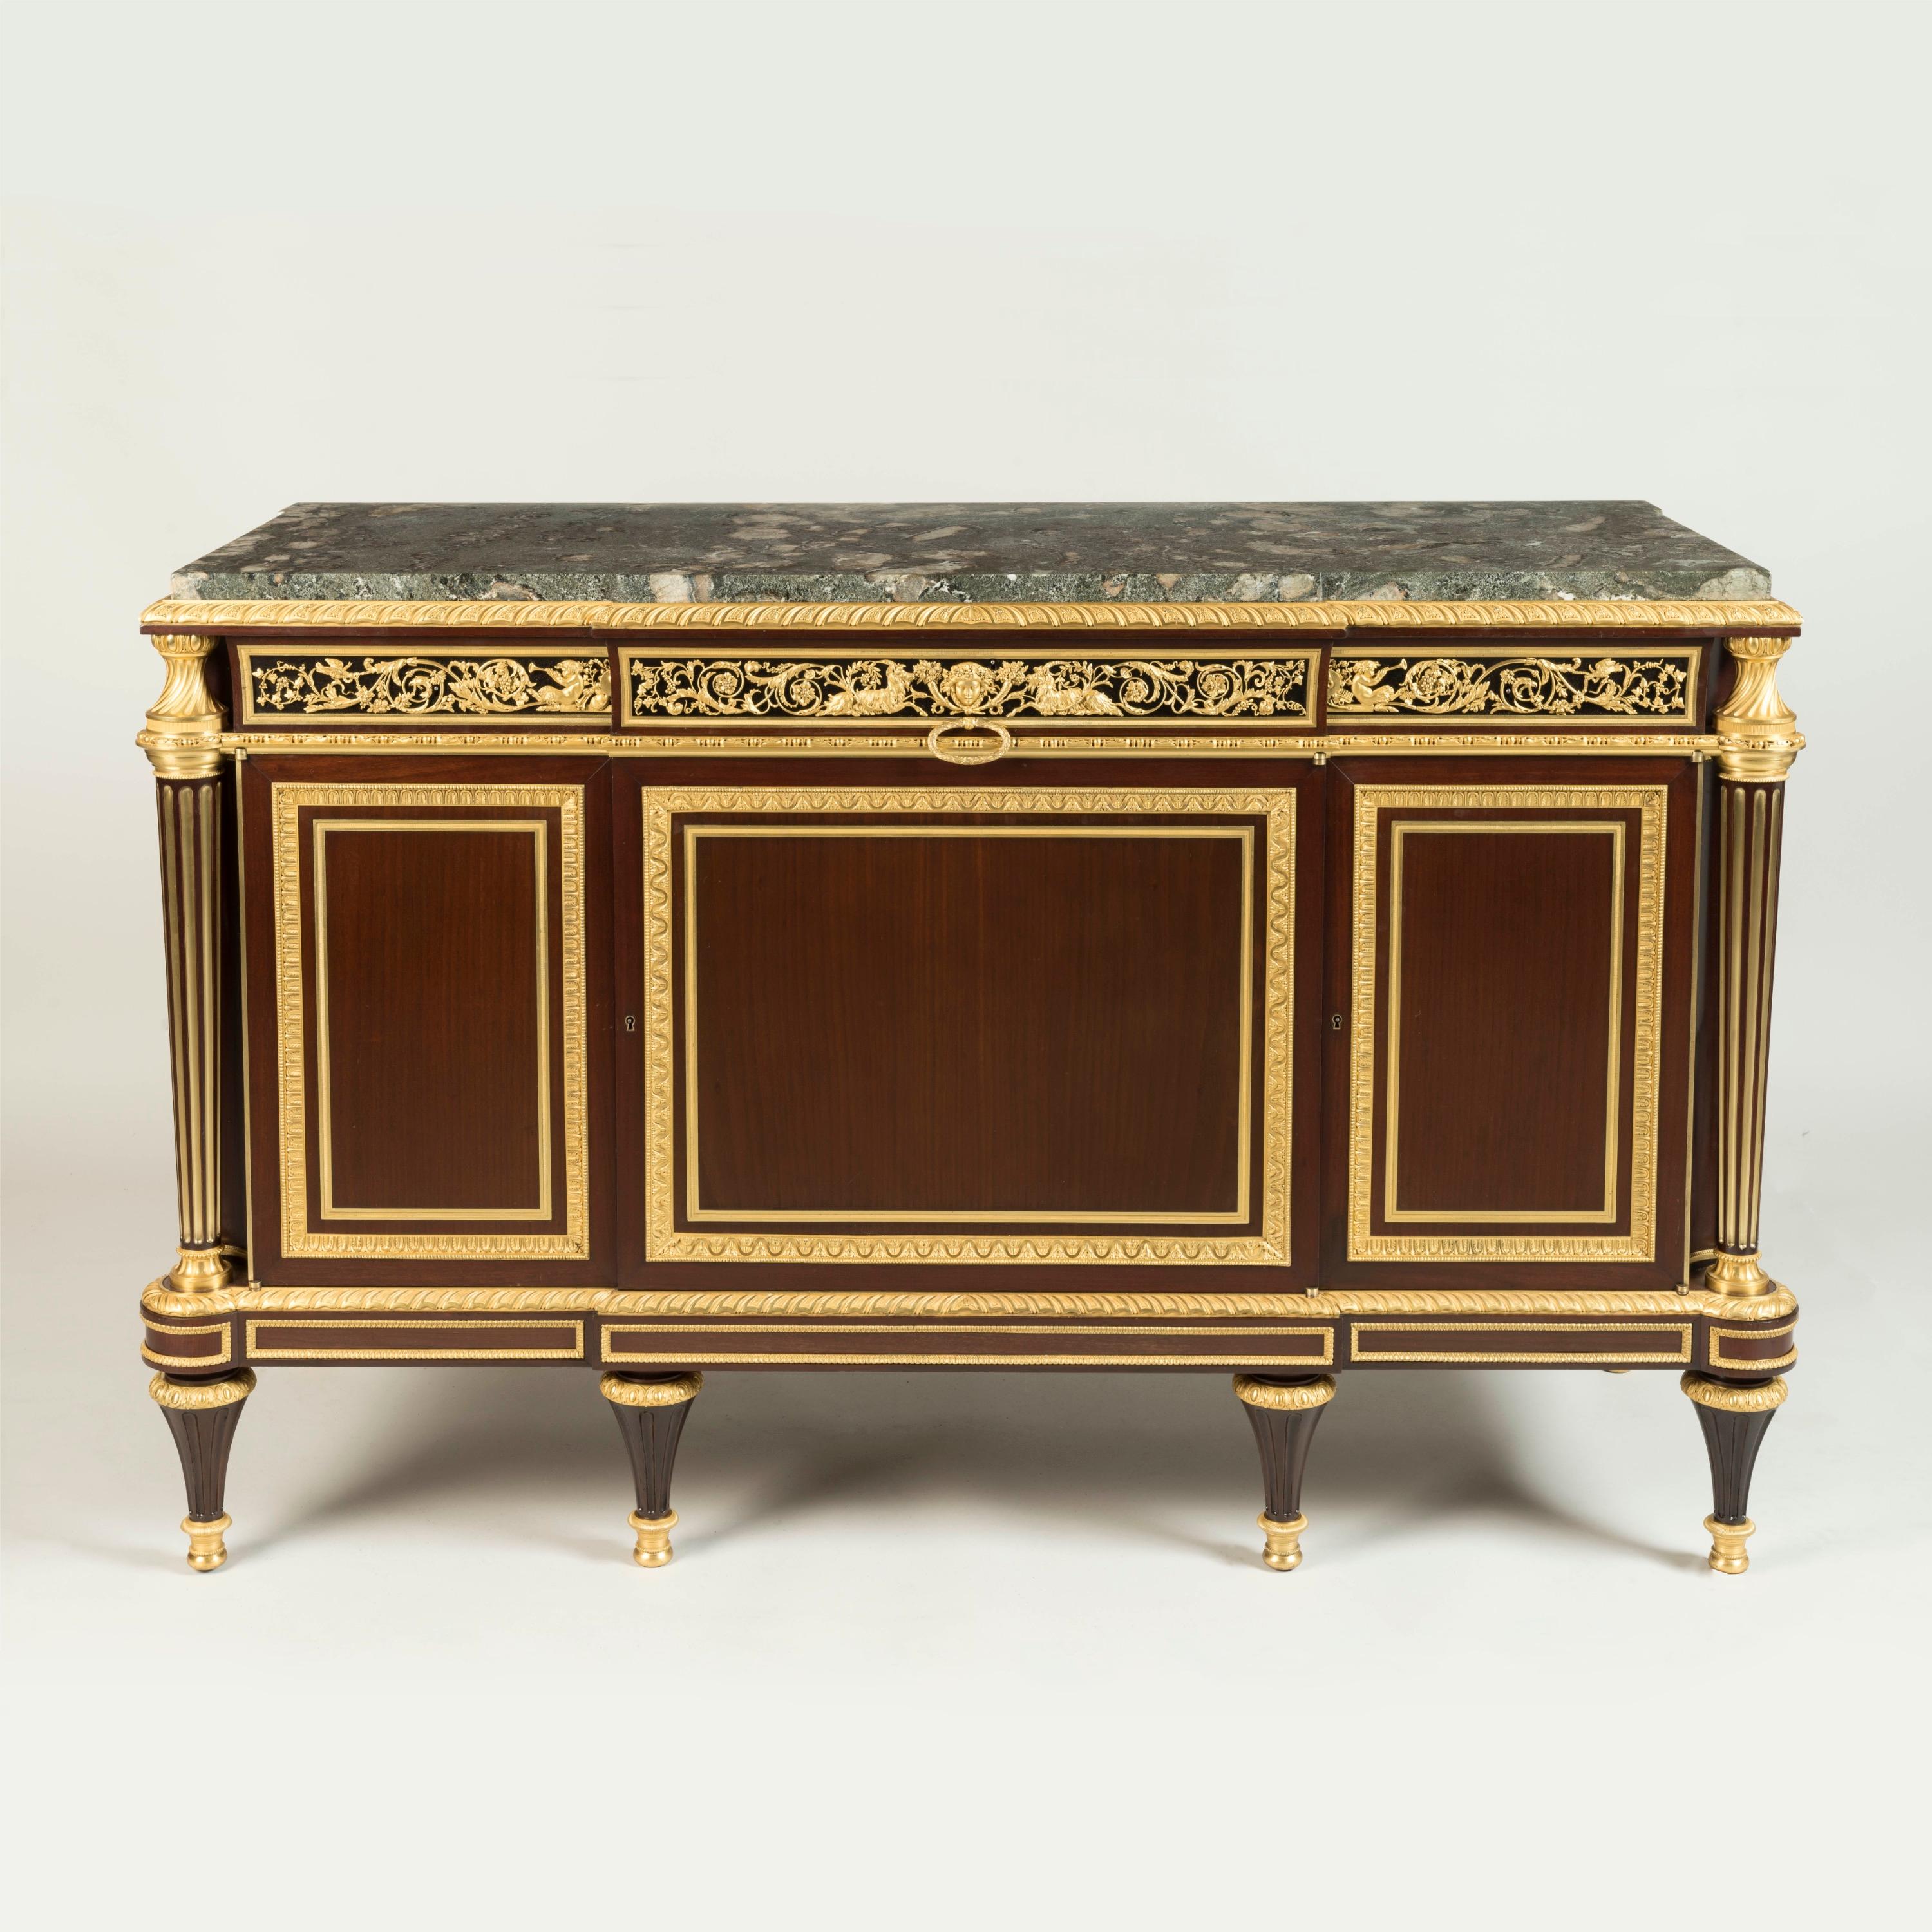 19th Century French Marble Top Commode in the Louis XVI Style by Henry Dasson In Good Condition For Sale In London, GB